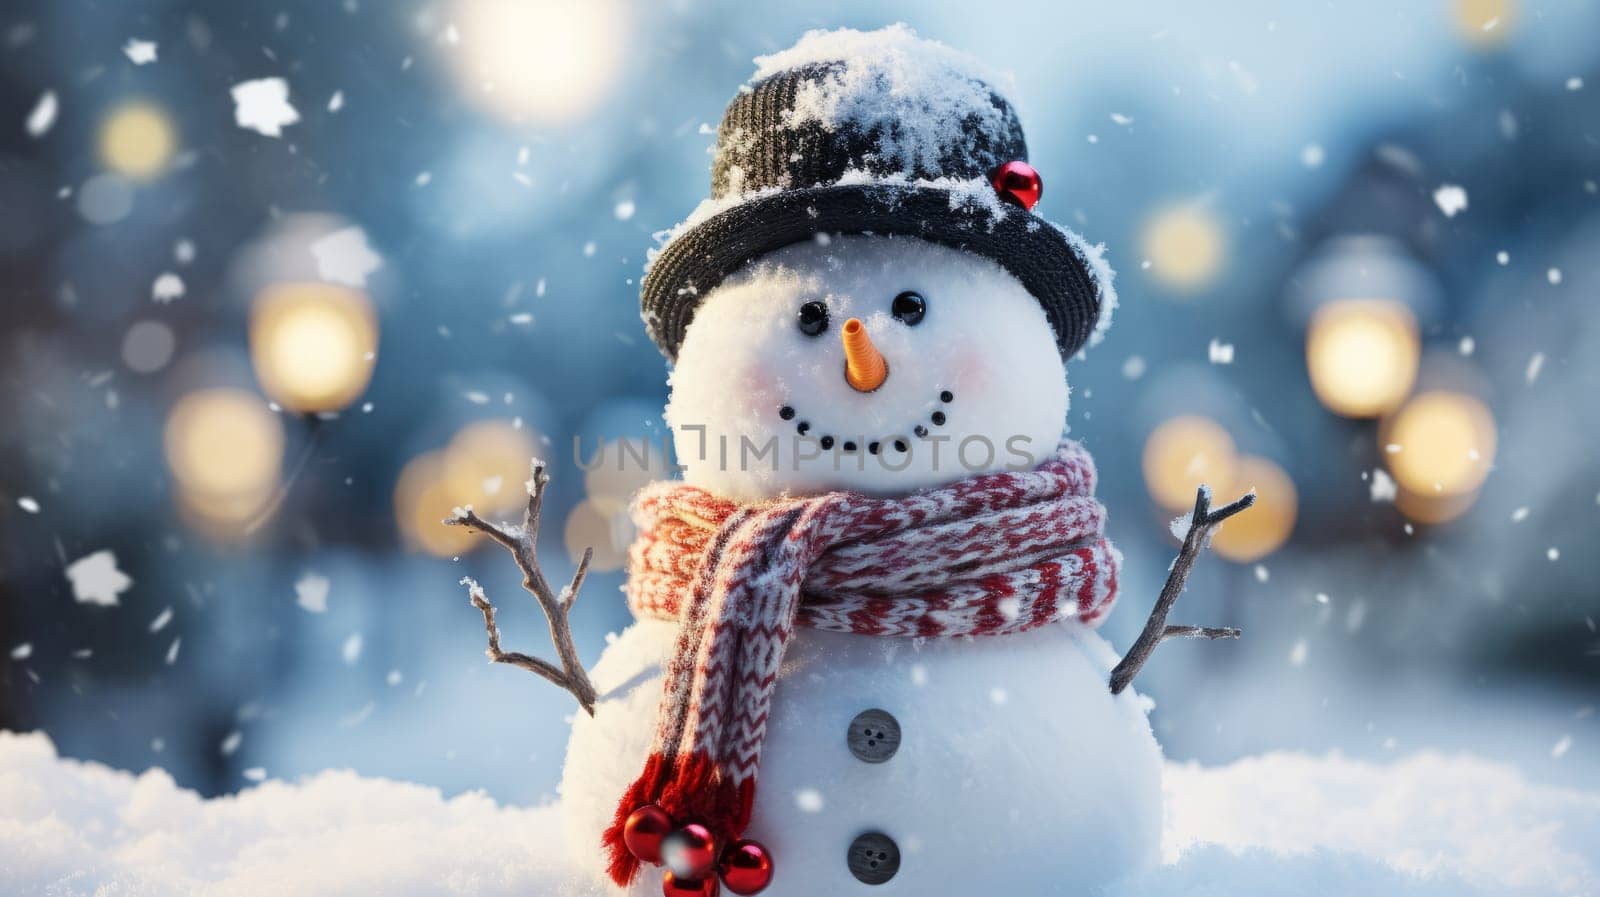 Holiday greeting card with snowman. Cute snowman is made on the street on the eve of Christmas and New Year holidays on a snowy sunny day, AI